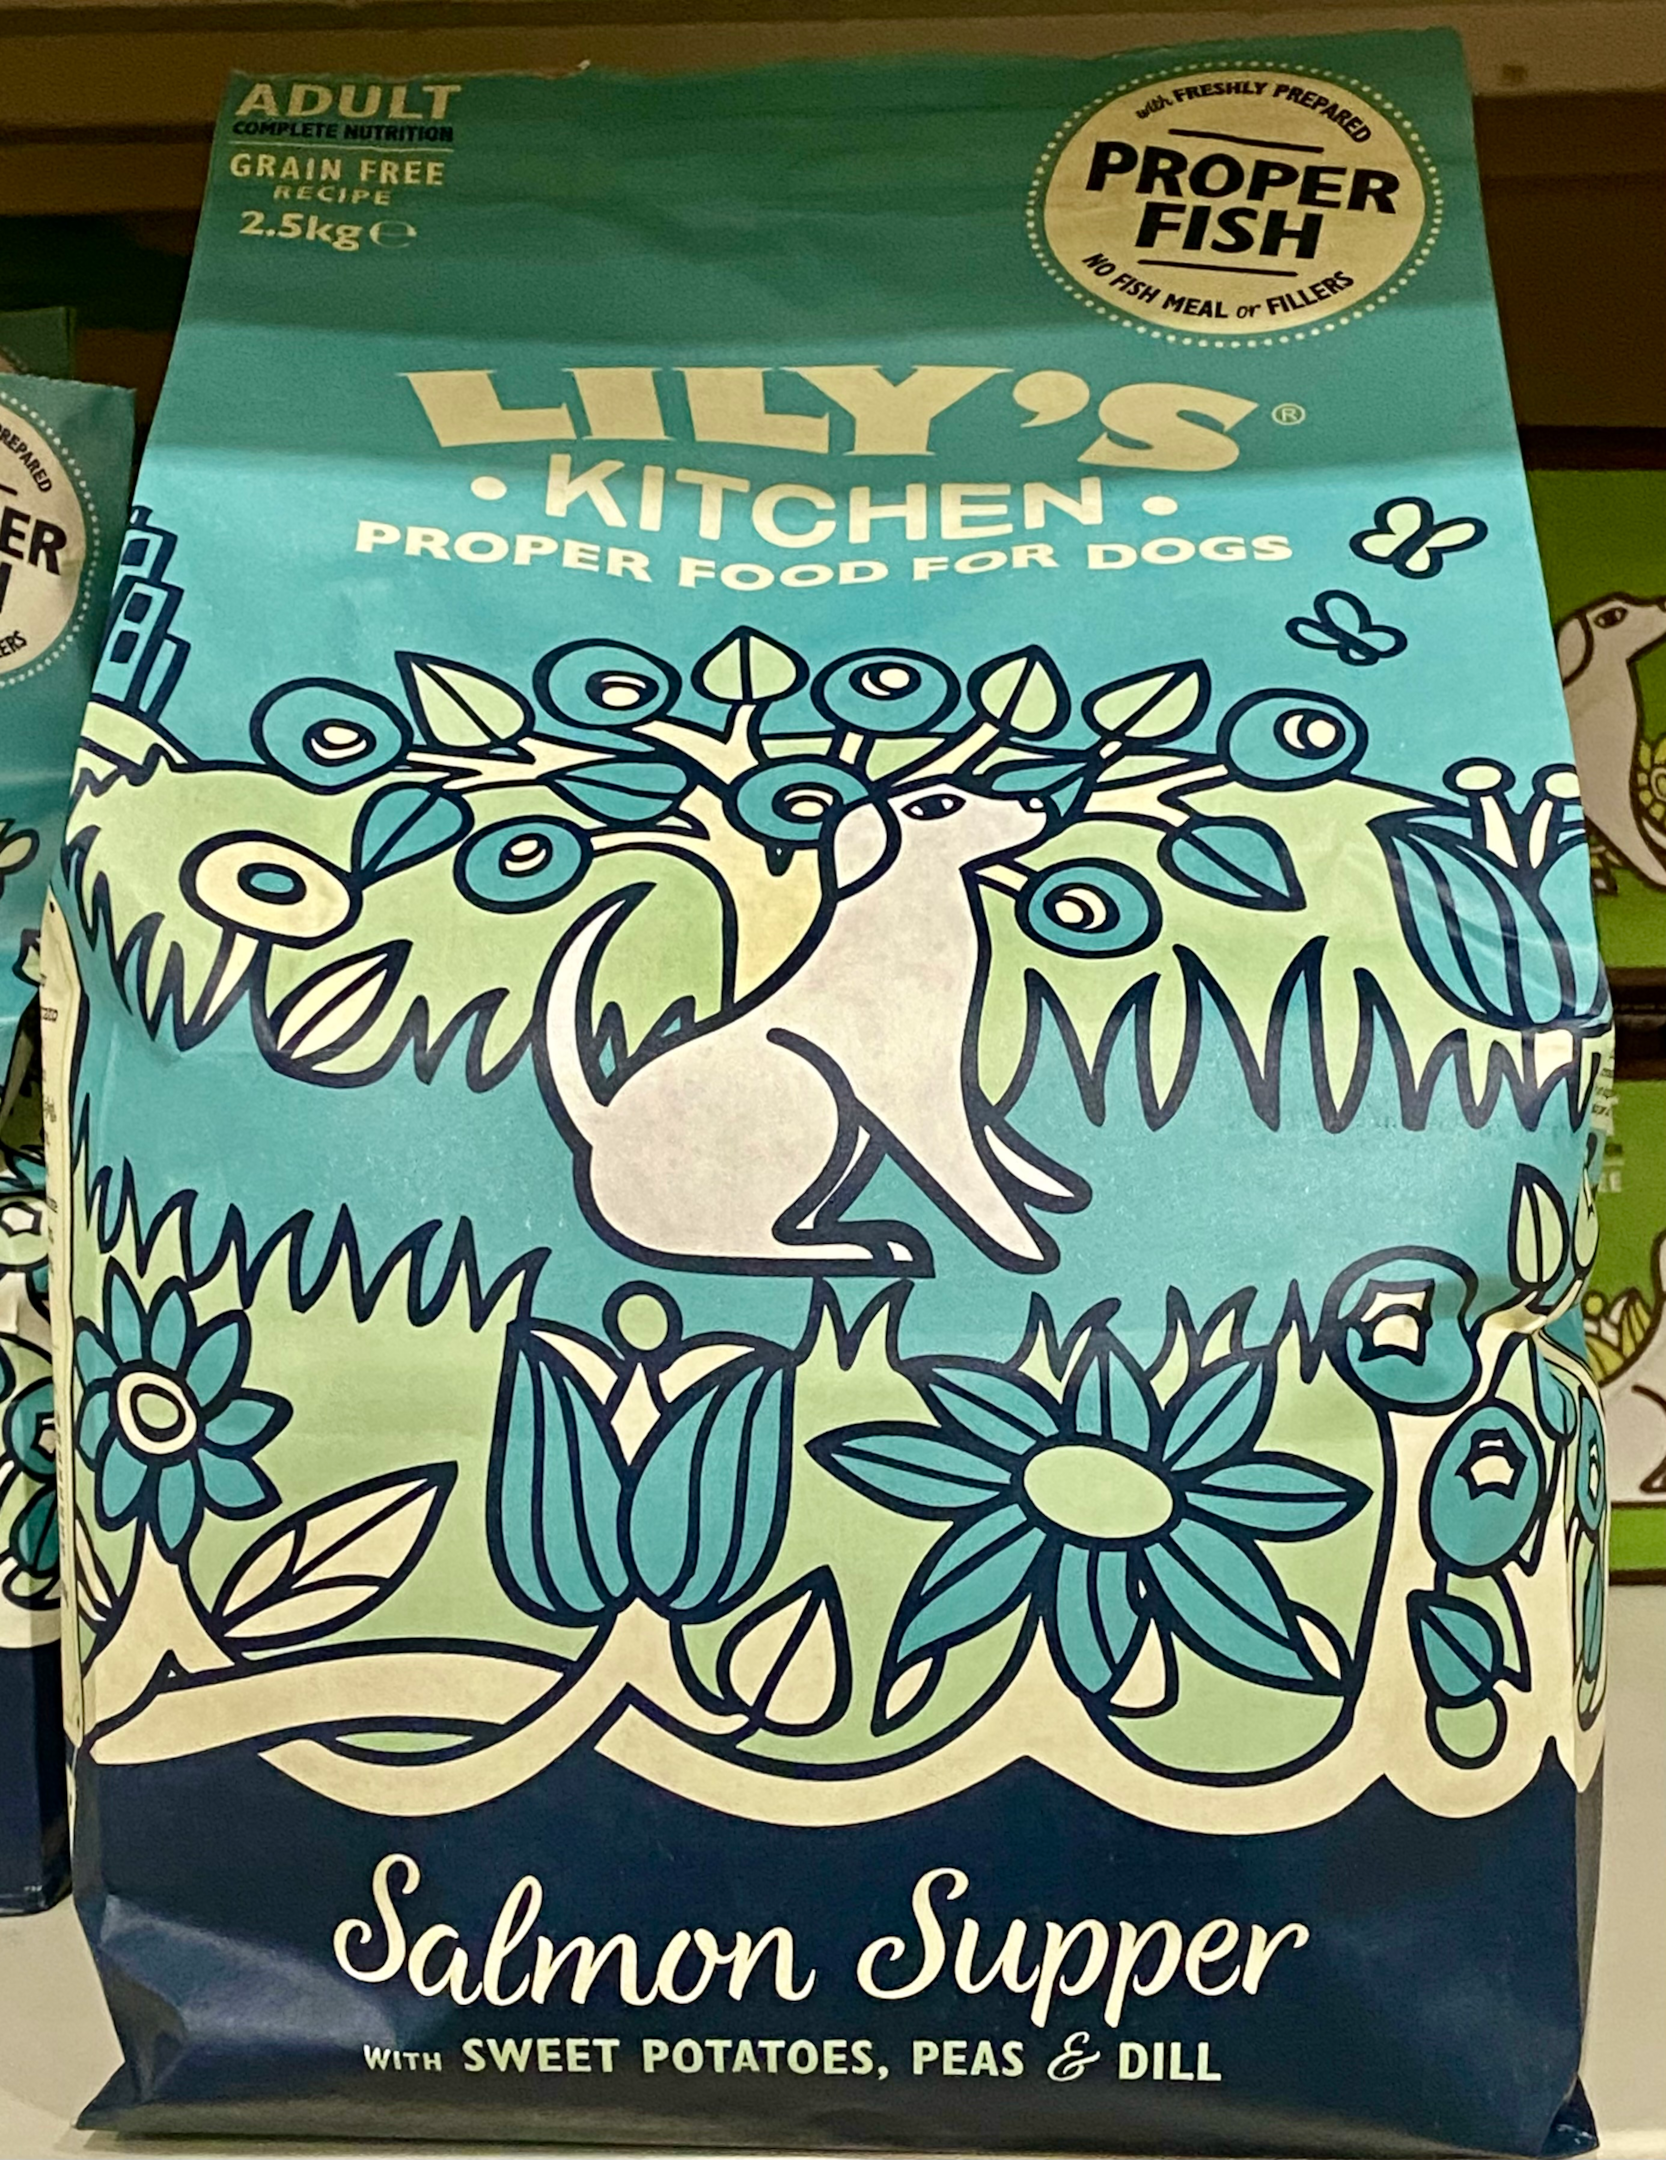 Lily's Kitchen Grain-Free Salmon Supper Dog Food